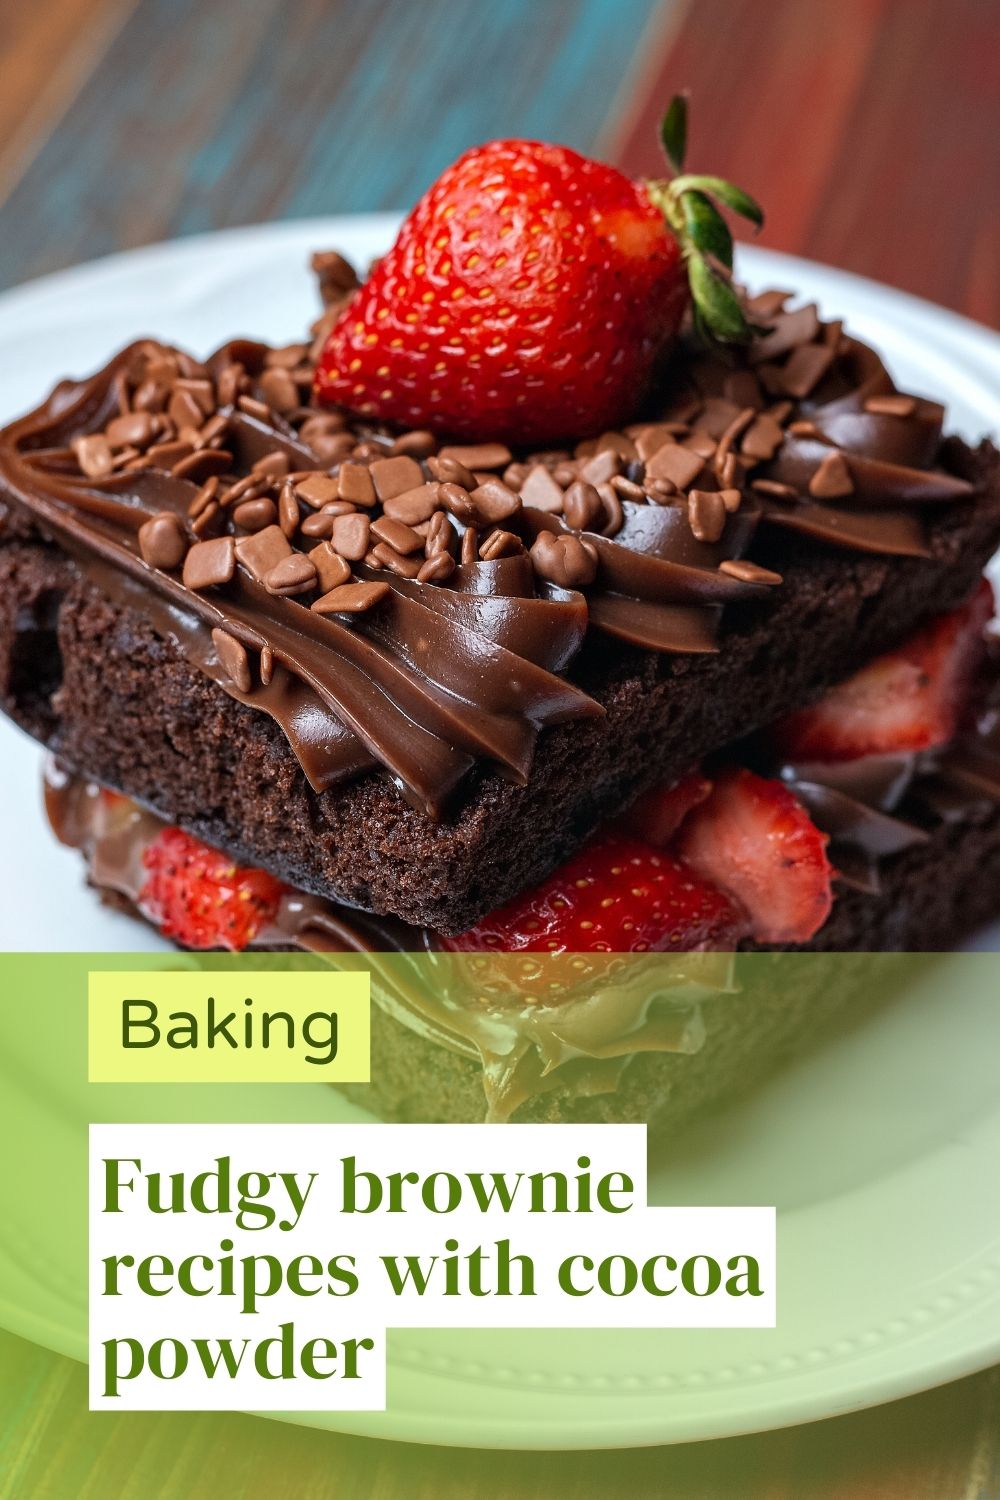 Fudgy brownie recipes with cocoa powder